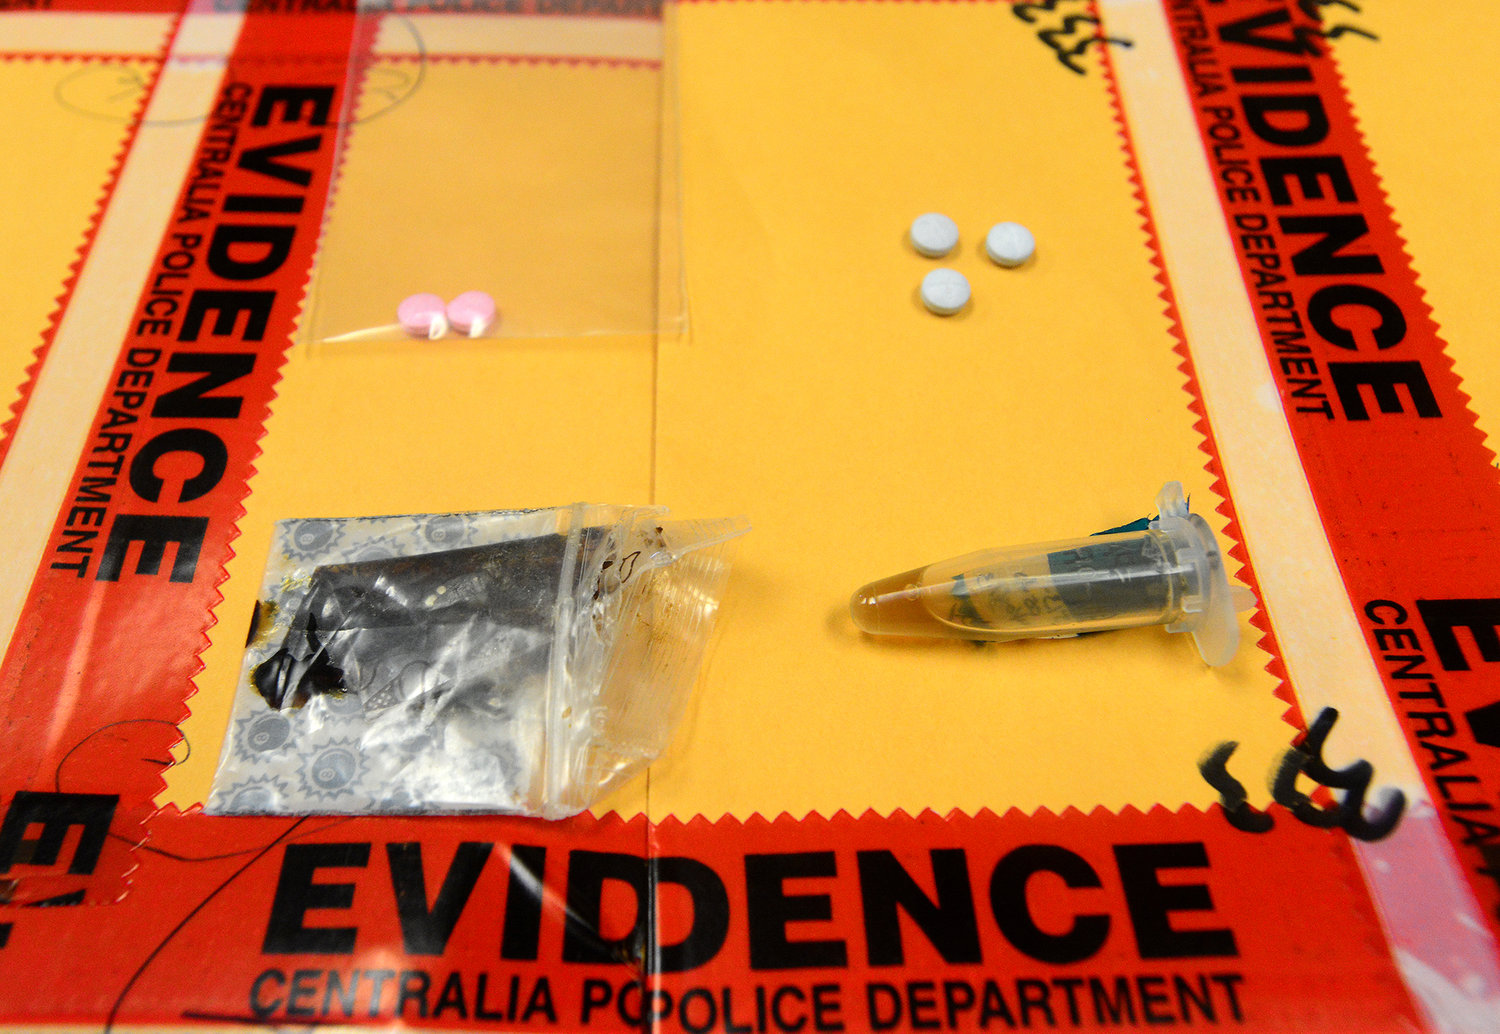 FILE PHOTO — Oxycodone pills, top, tar heroin, bottom left, and liquid heroin, is seen in the evidence department of the Centralia Police Department in this file photo.